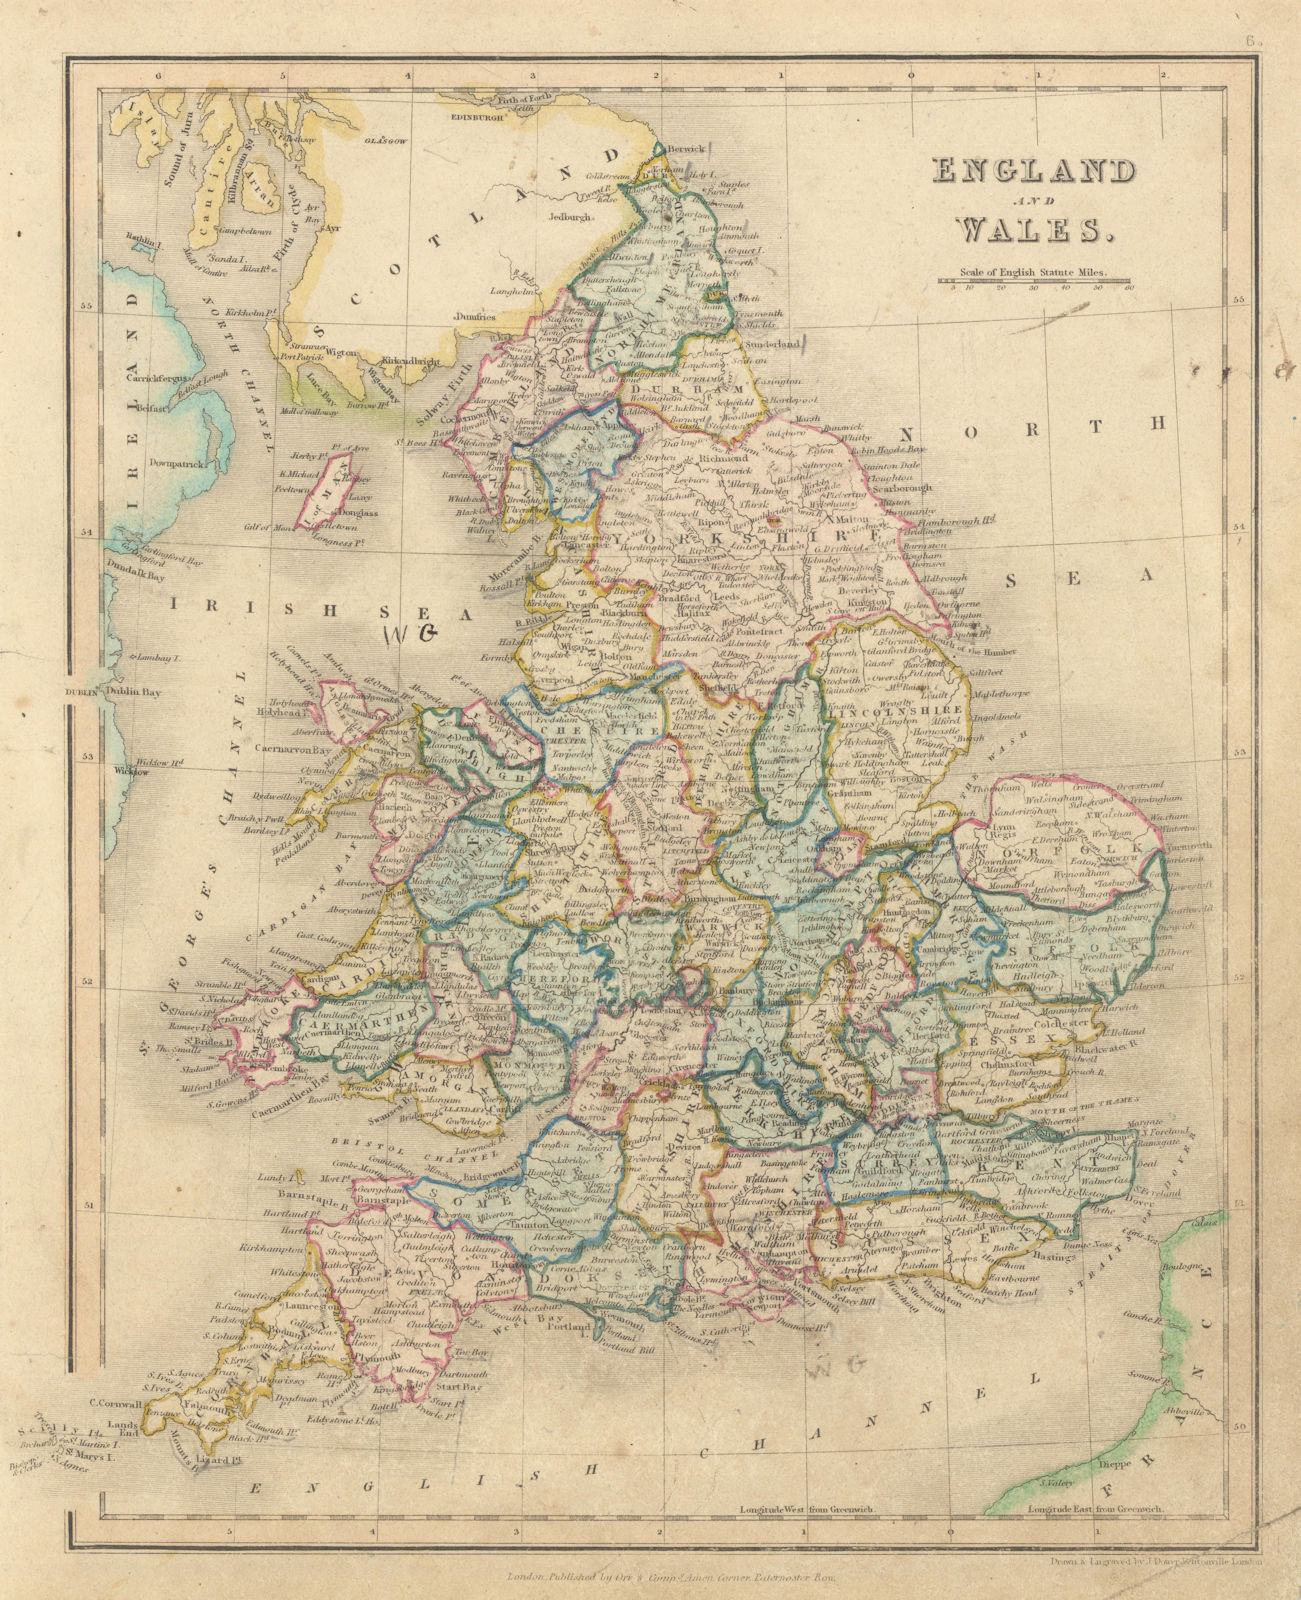 Associate Product England and Wales in counties by John Dower 1845 old antique map plan chart